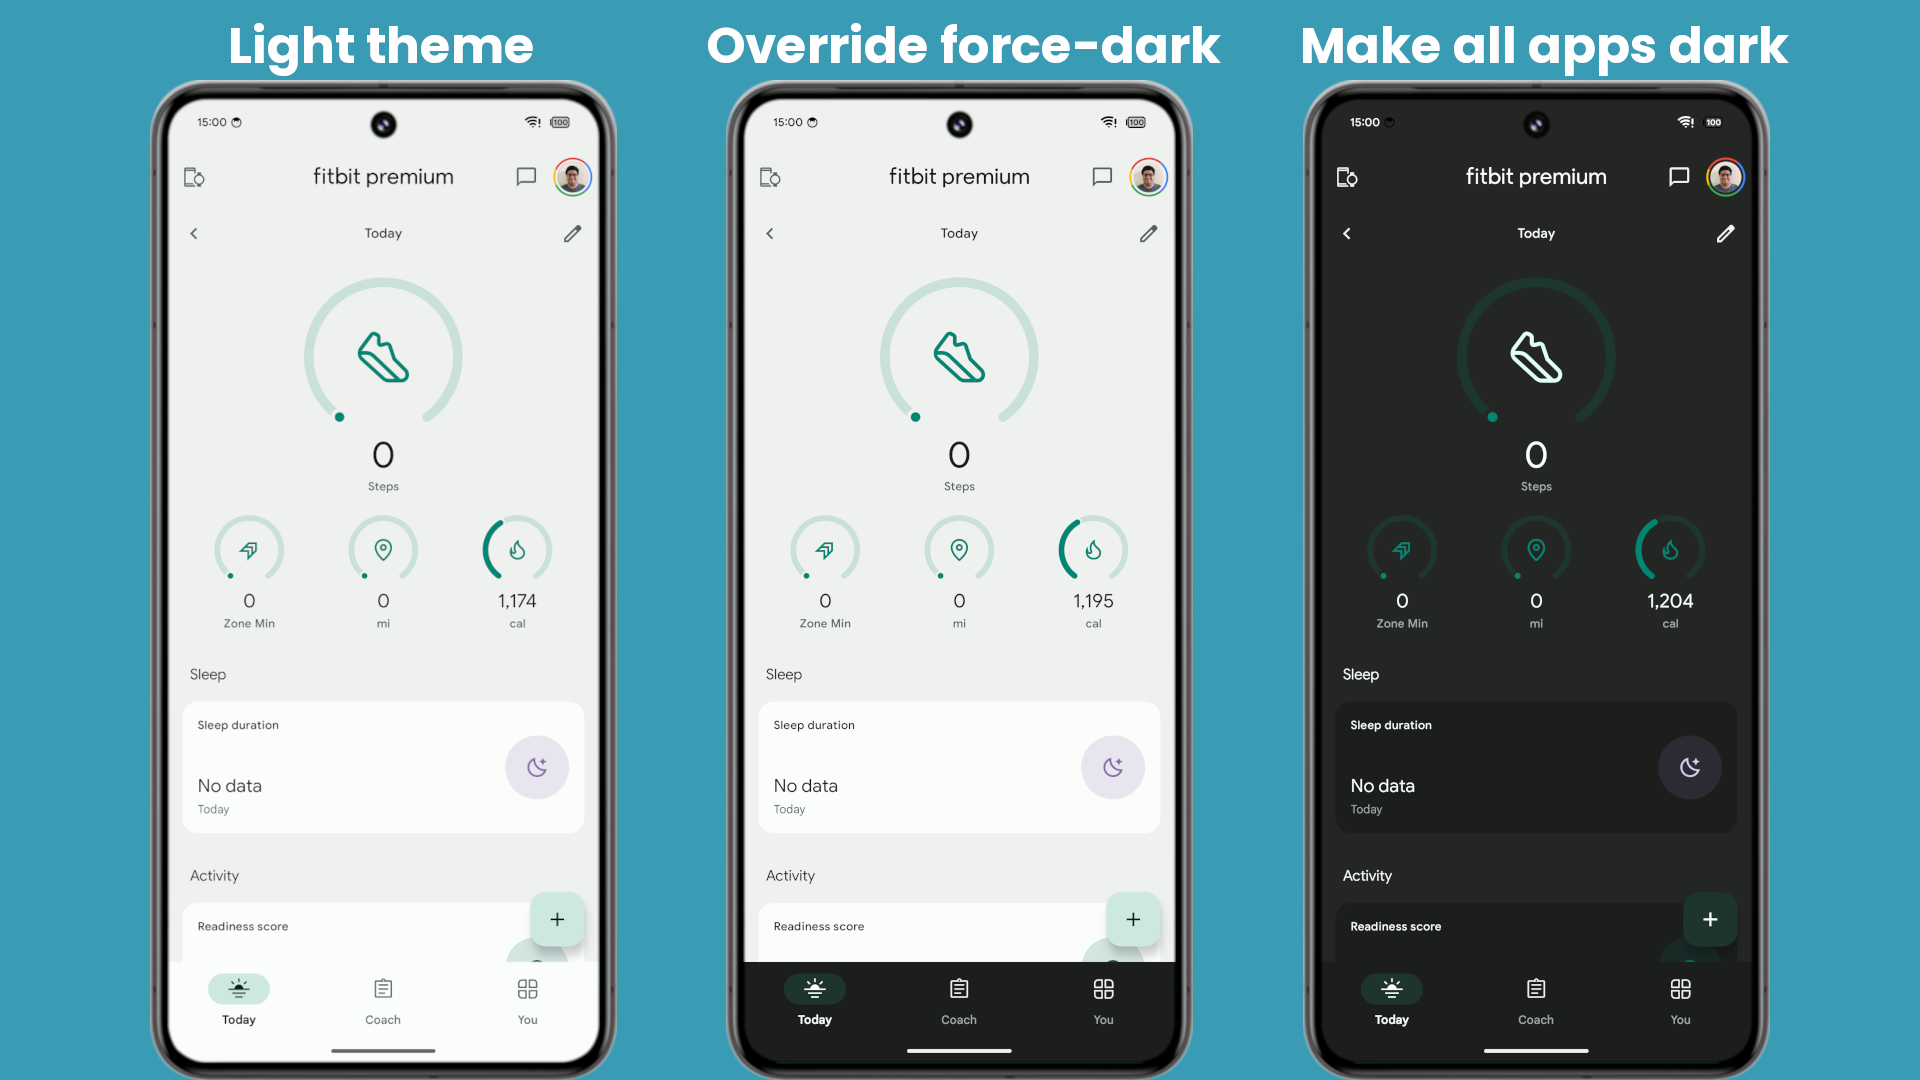 Android 15 will let you force apps to go dark, even if they don’t support it